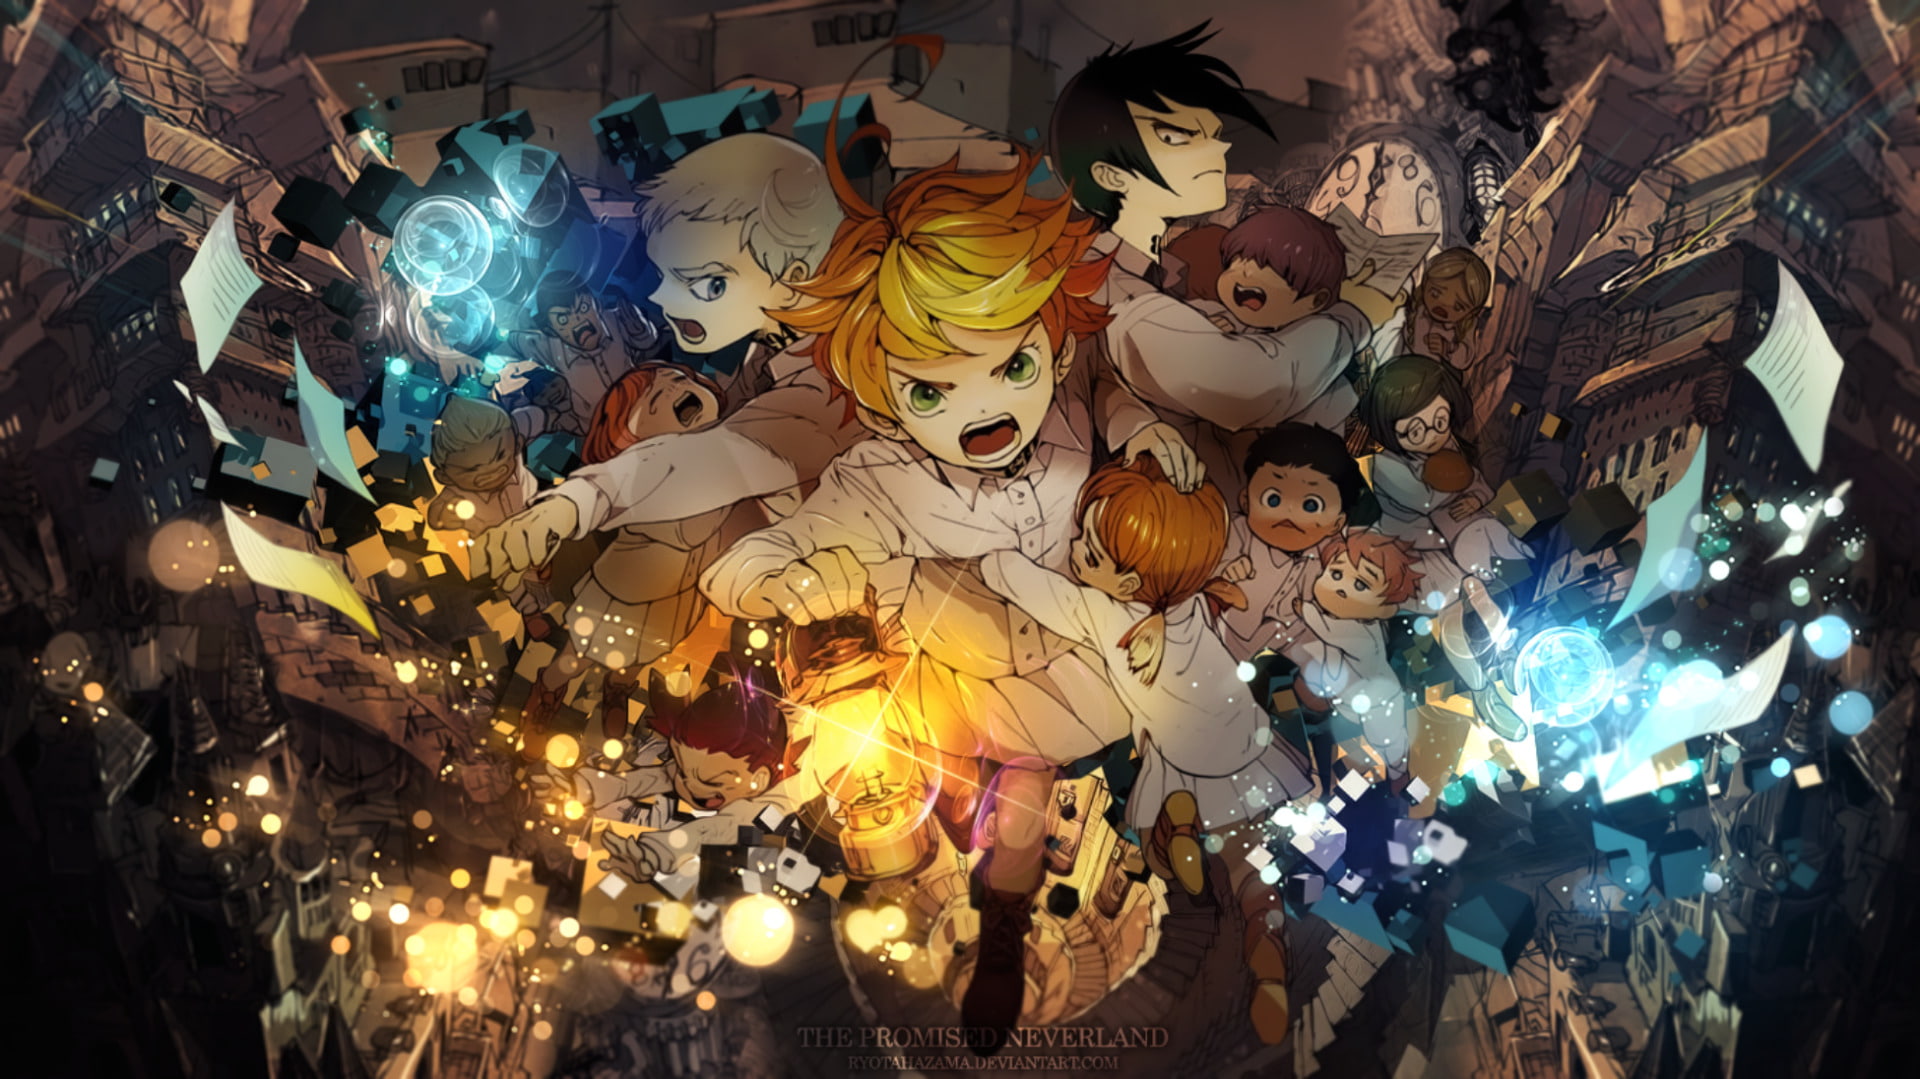 HD Wallpaper Anime The Promised Neverland Anna